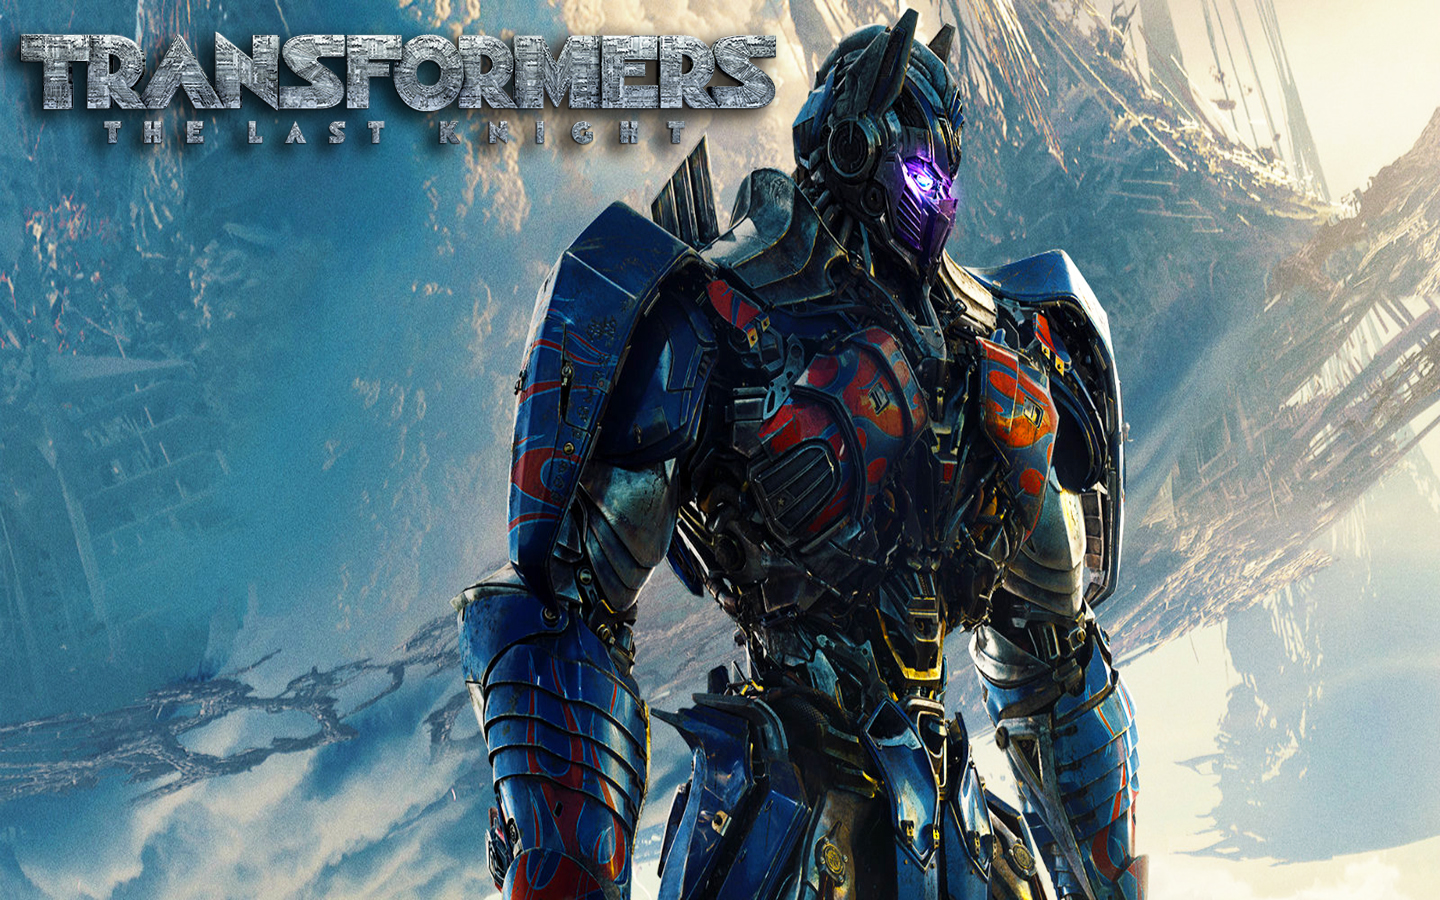 ‘Transformers: The Last Knight’ Opens With Franchise’s Lowest Box Office